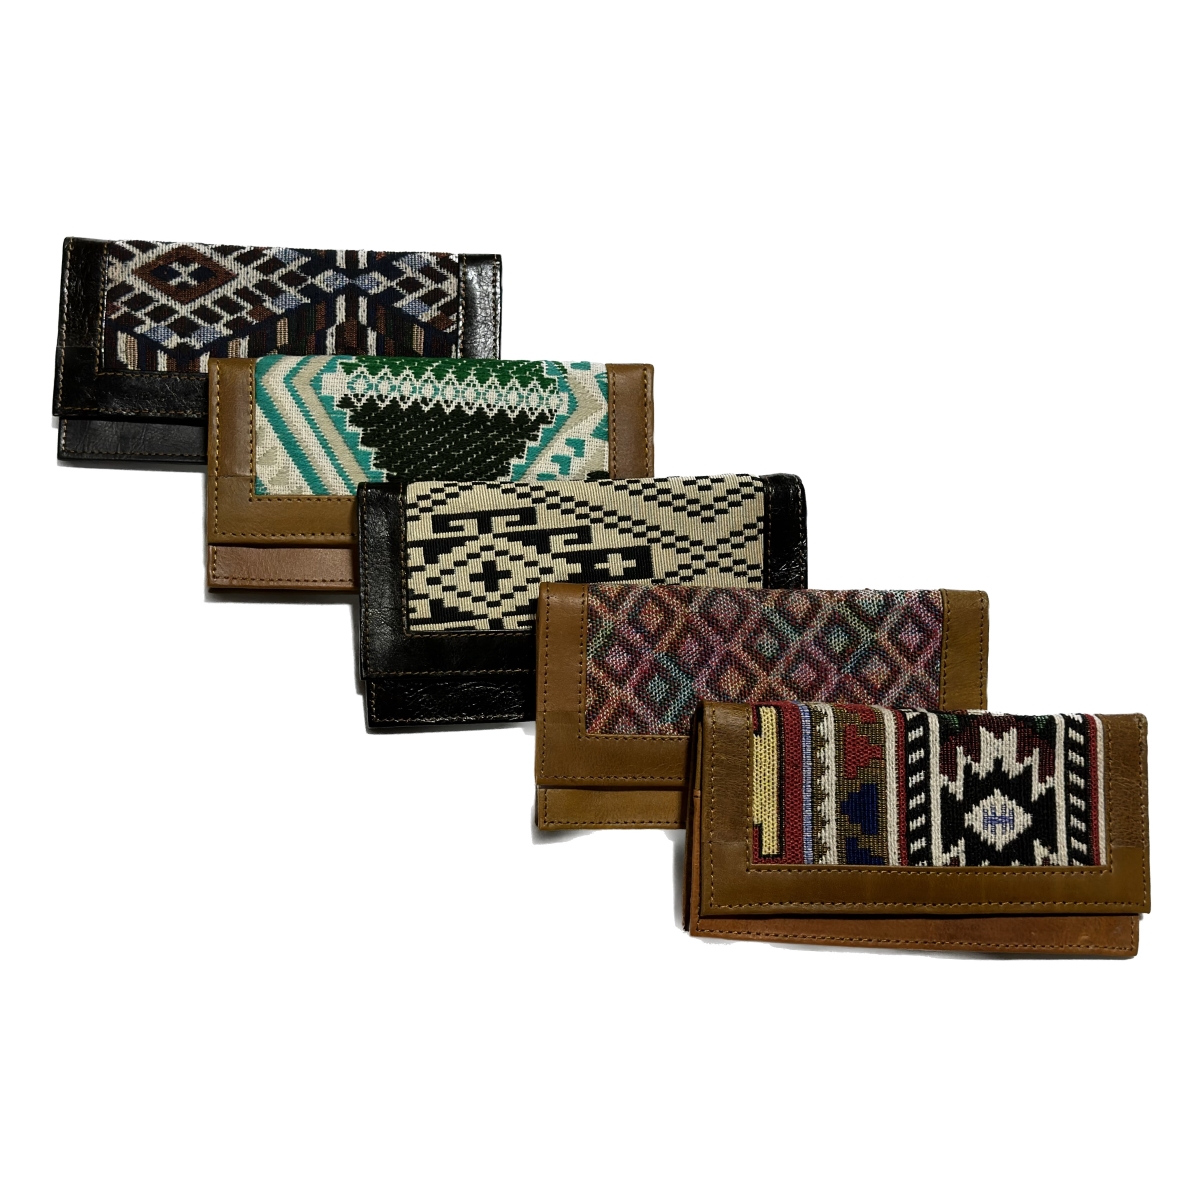 Fabric & Leather Wallet